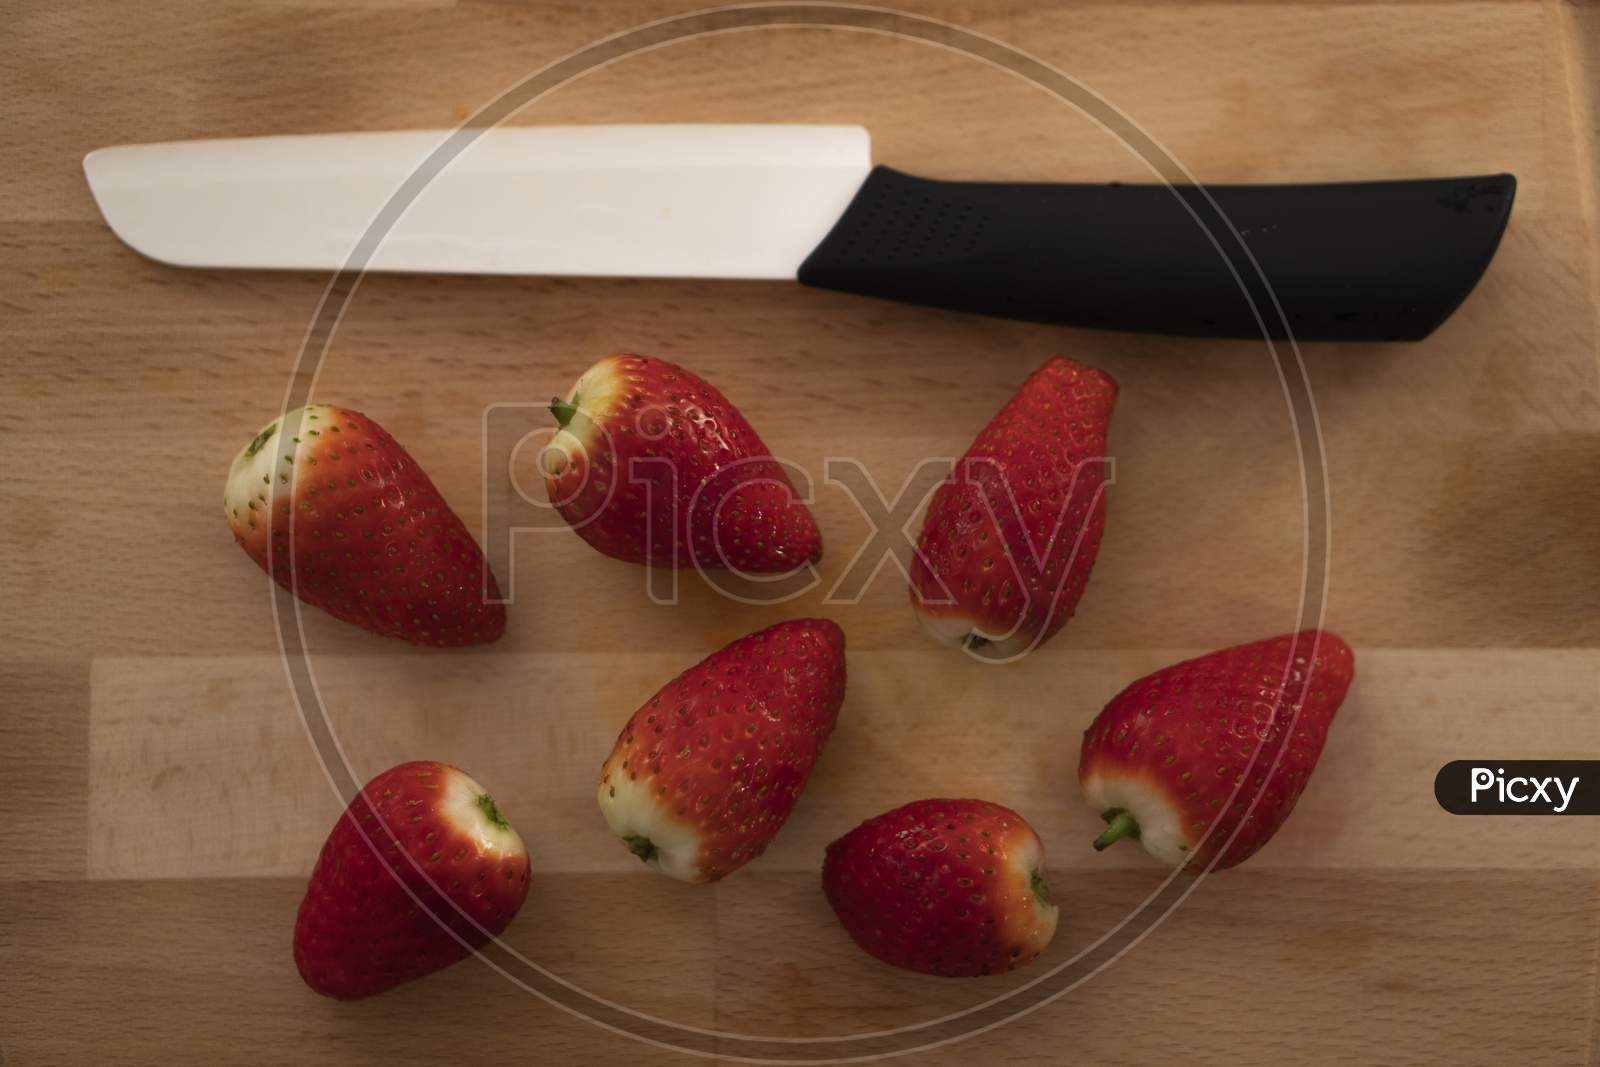 Red and Juicy Strawberries with a knife.